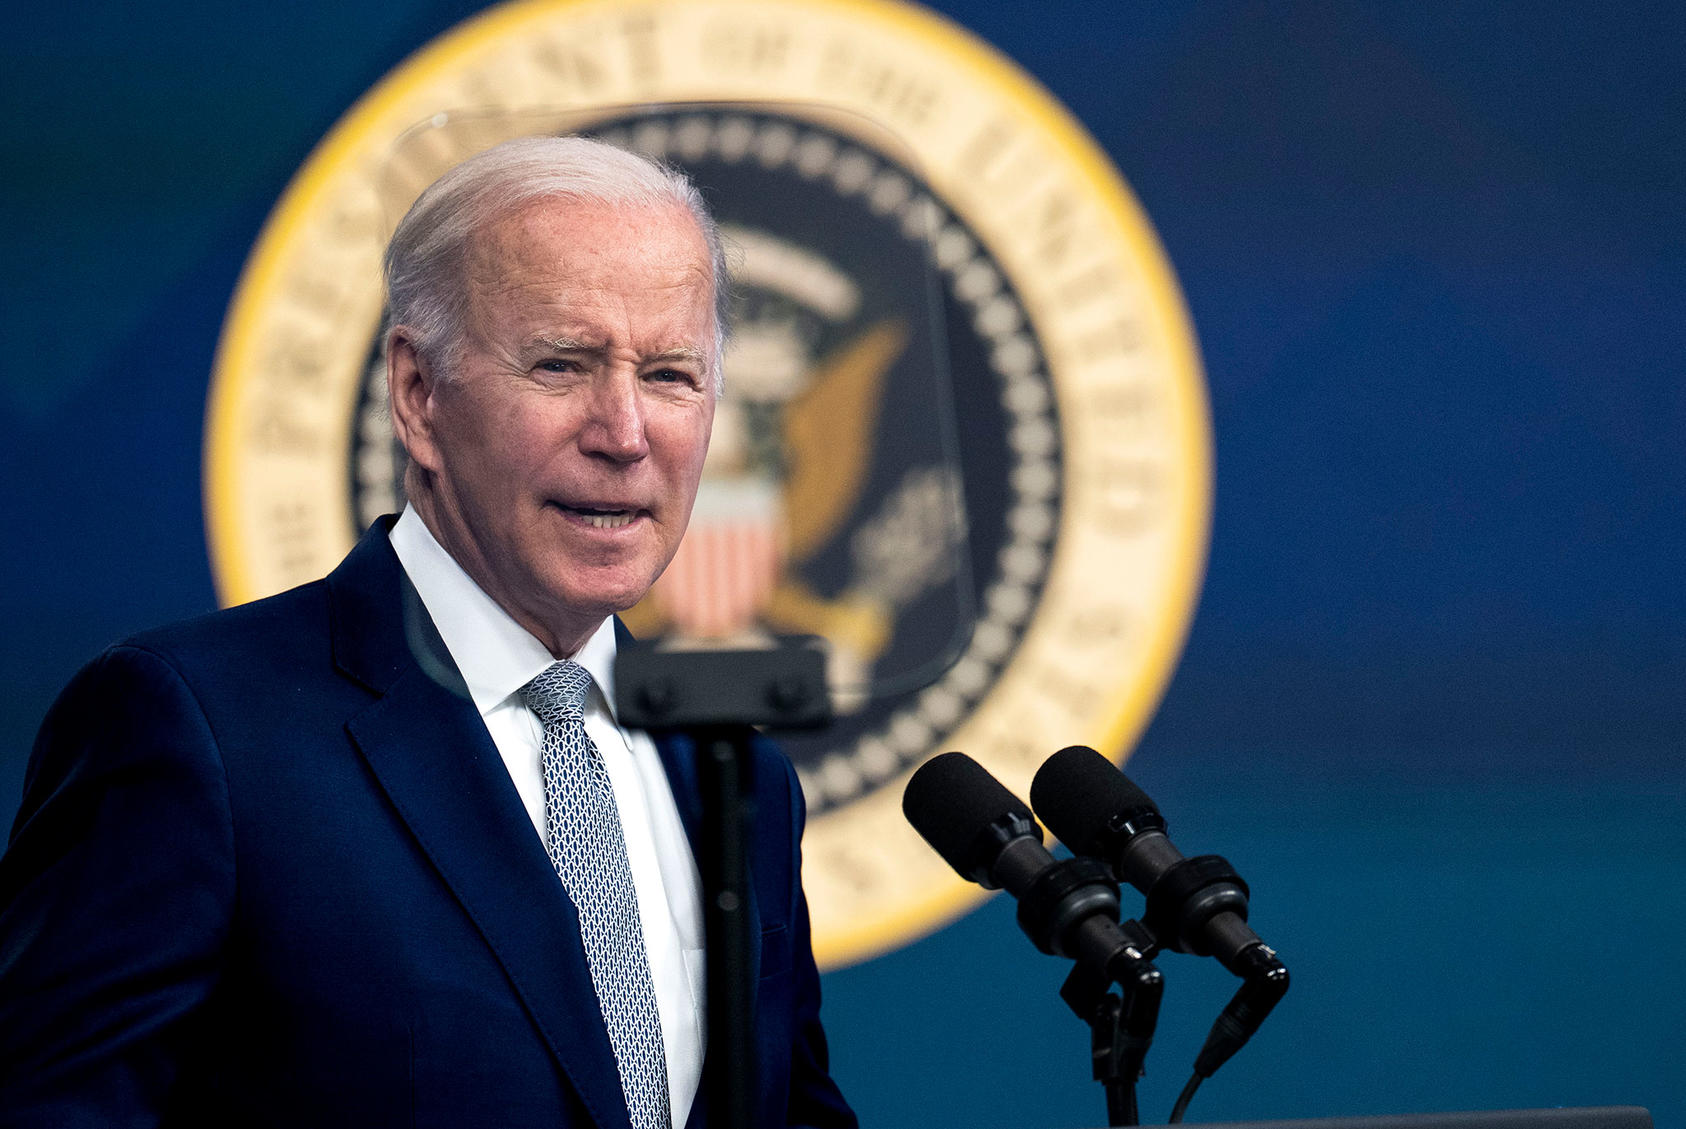 Biden Traveling to Europe: Reinforcing Alliance Backing Ukraine in Fight with Russia